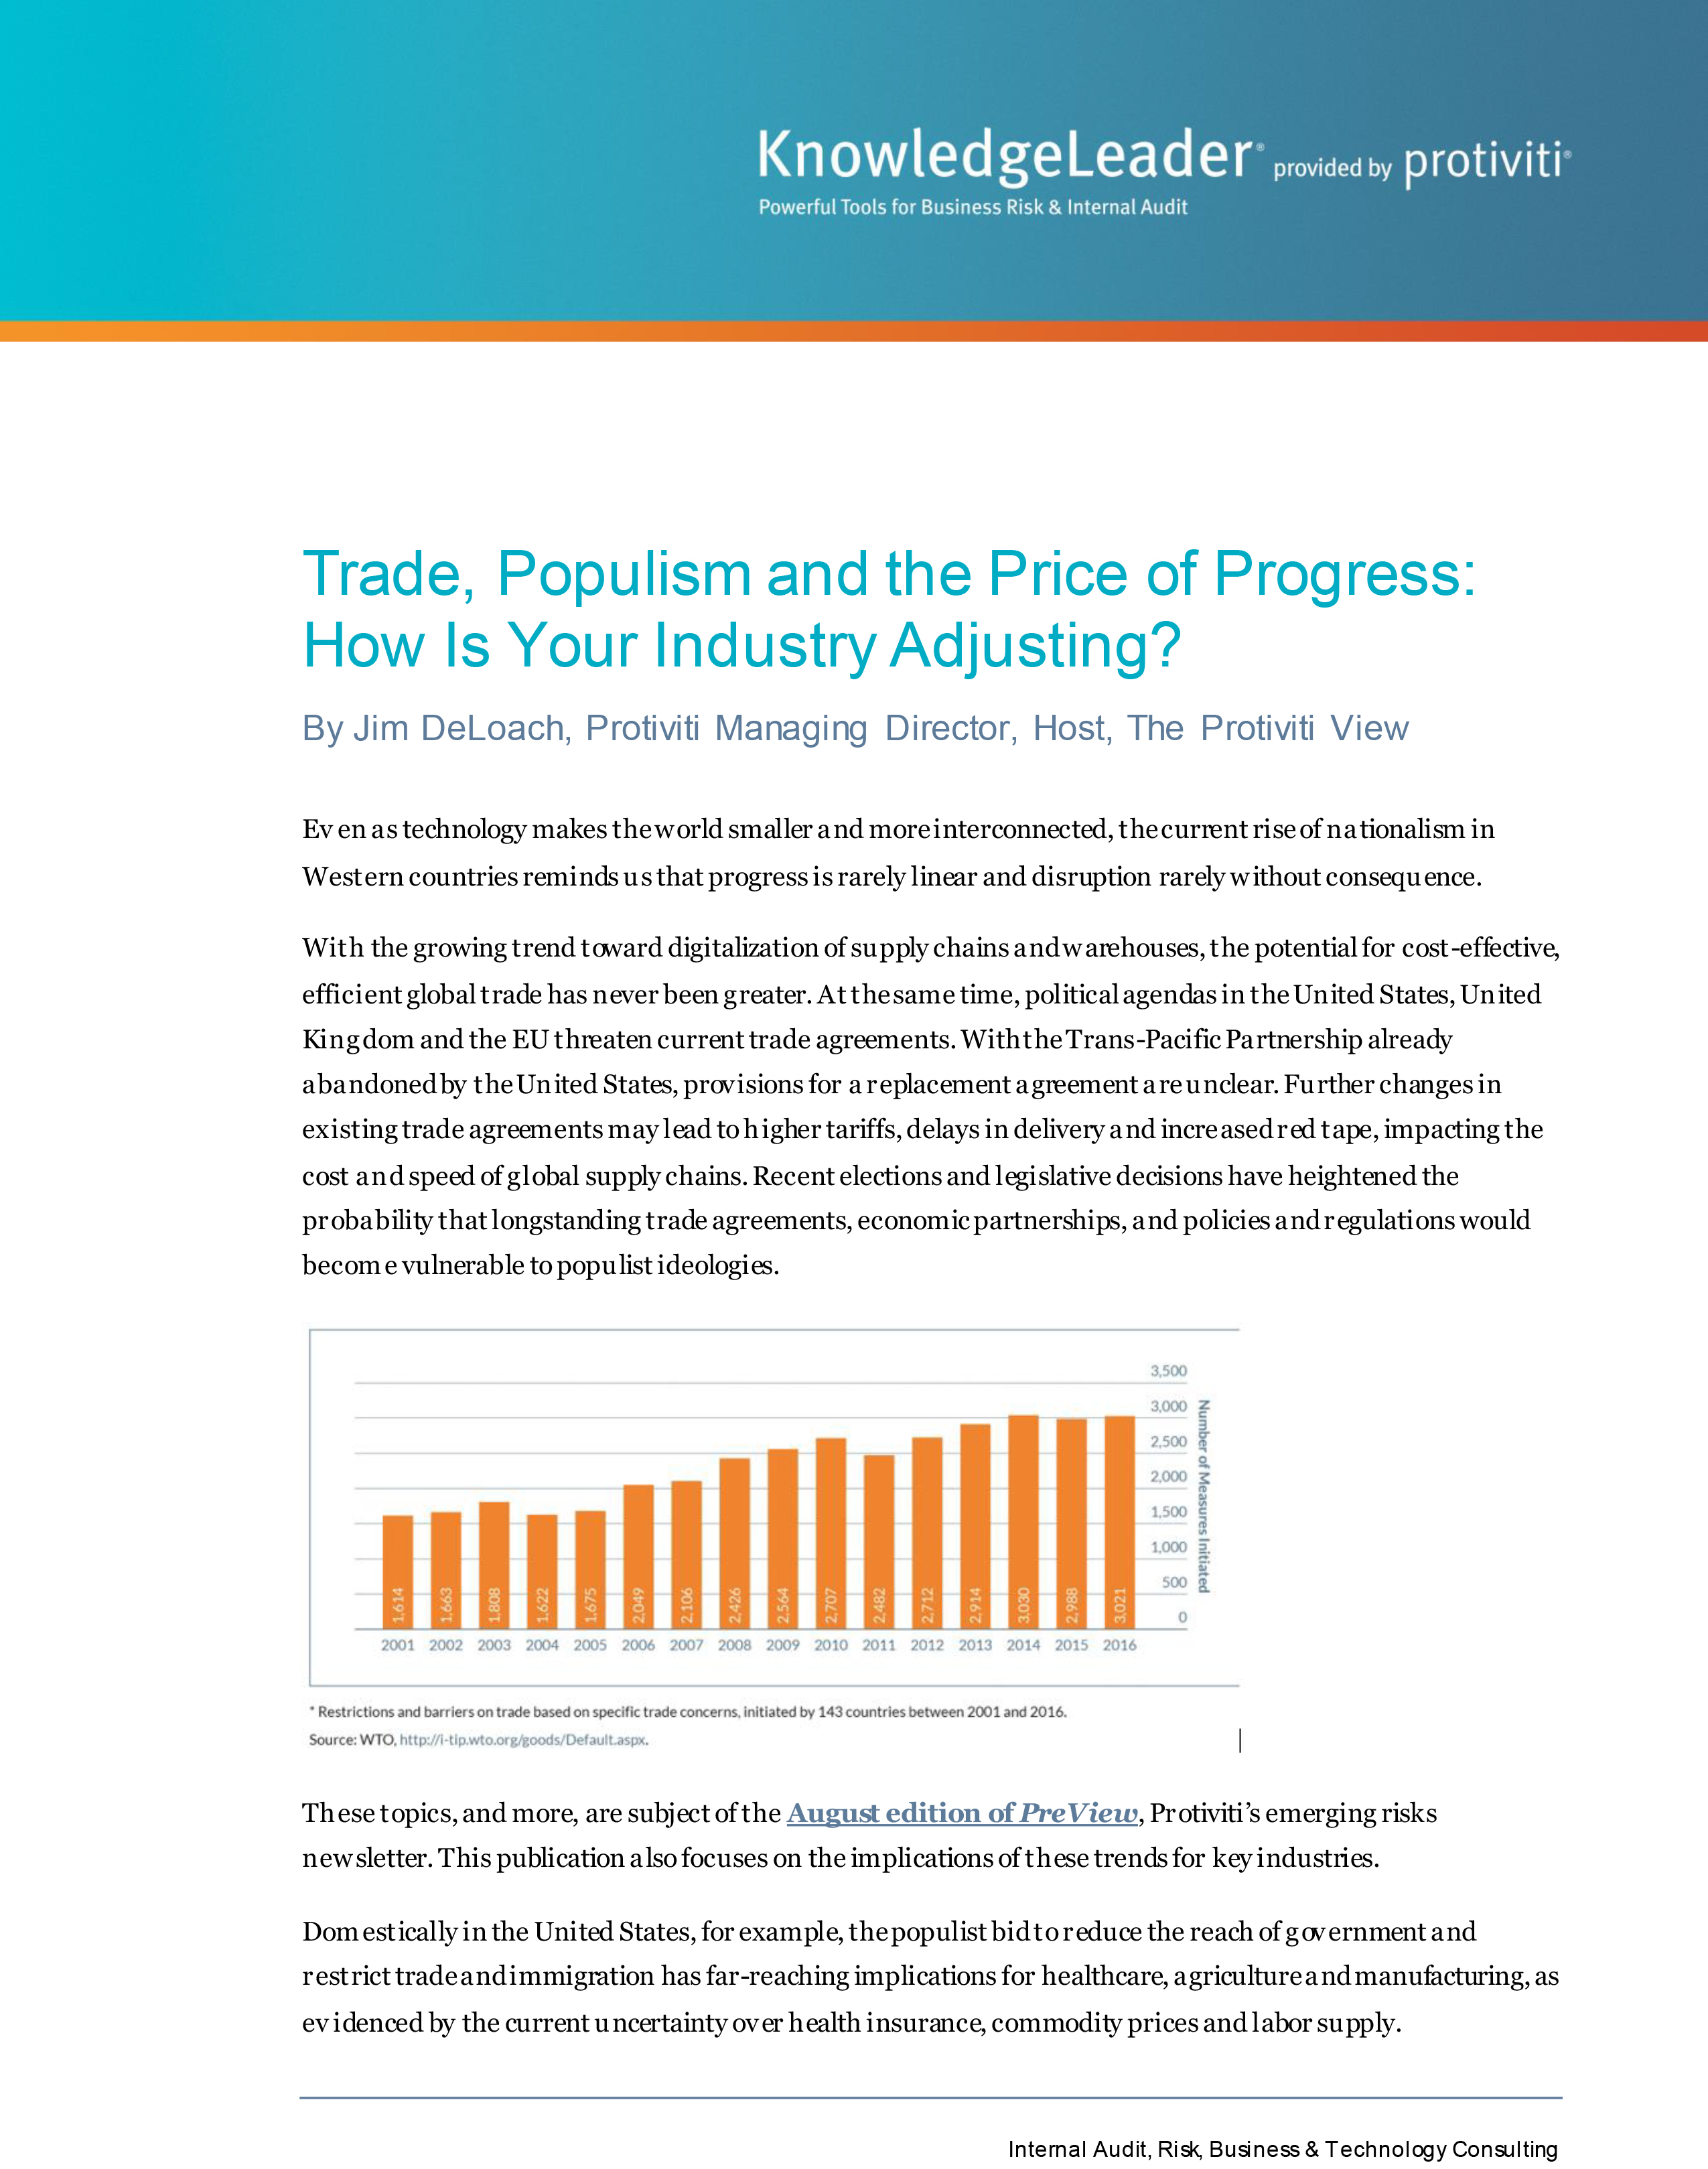 Screenshot of the first page of Trade, Populism and the Price of Progress - How Is Your Industry Adjusting